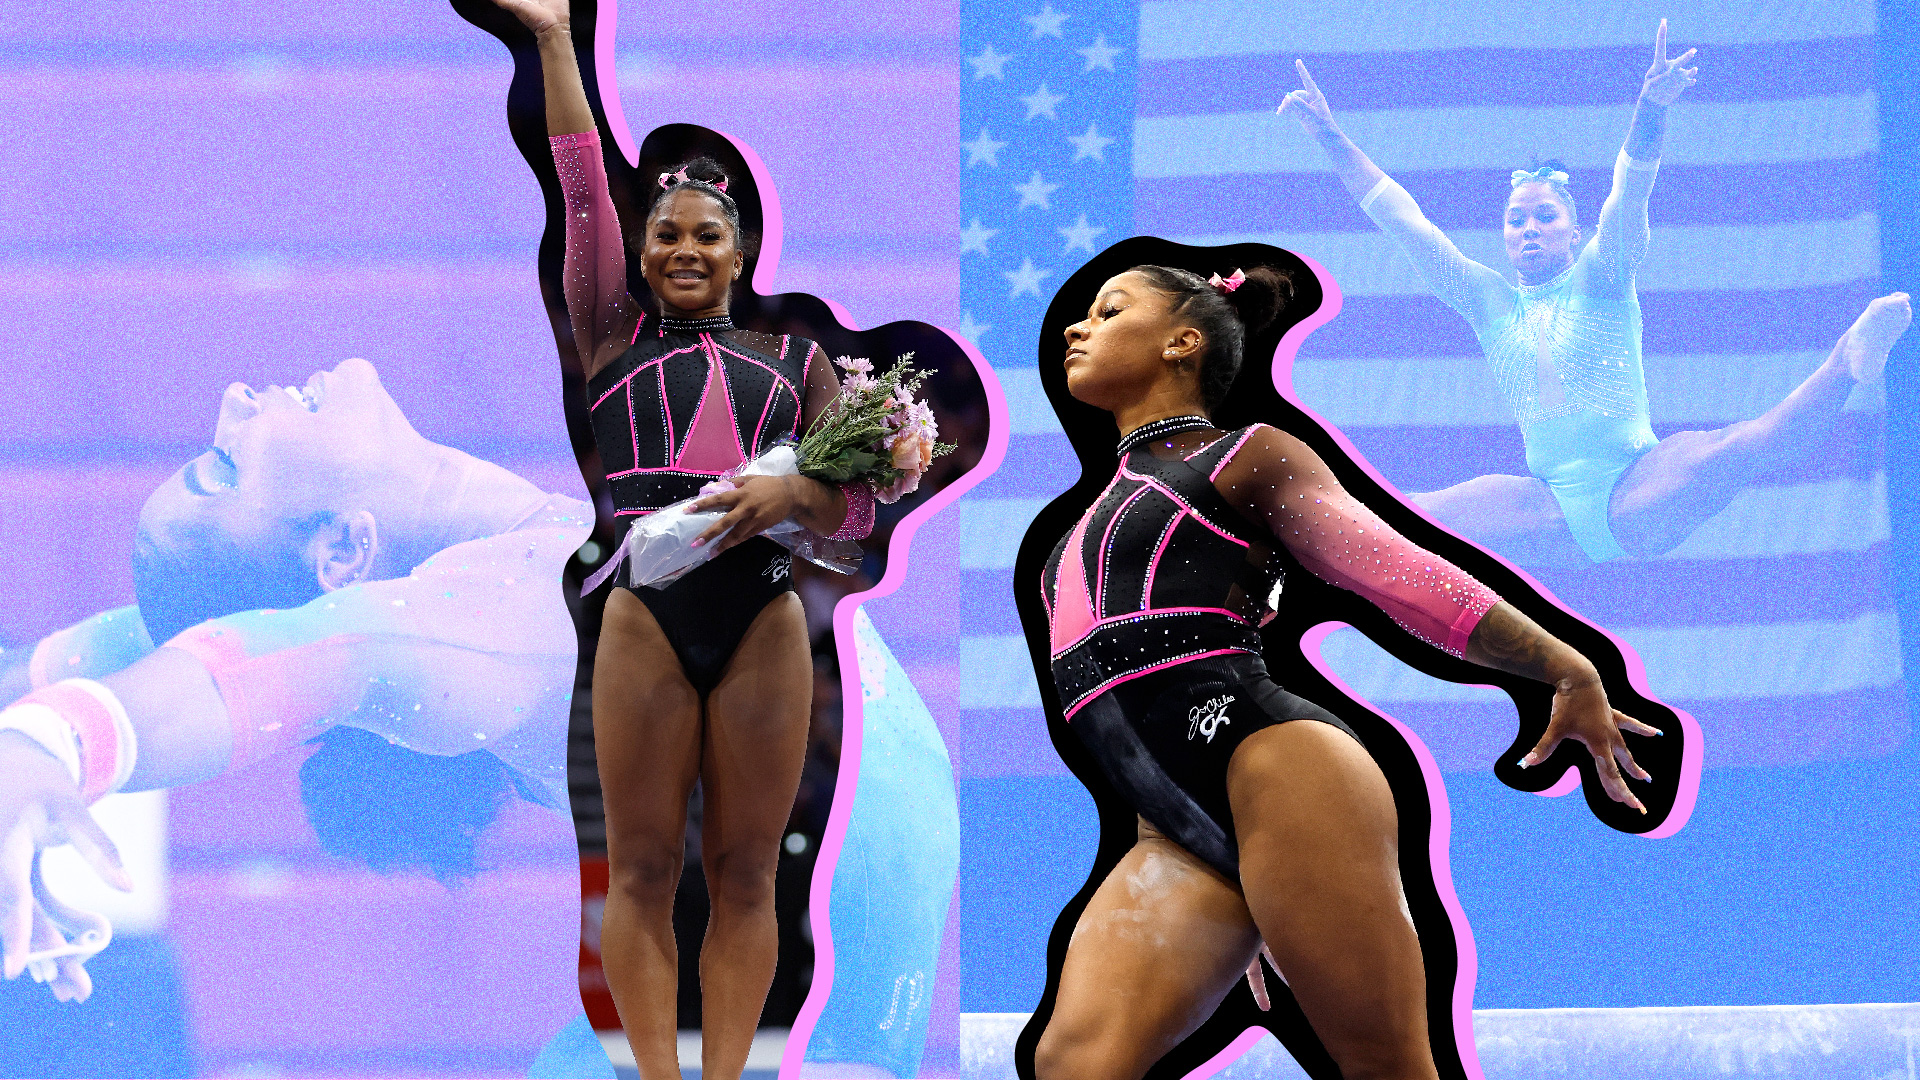 Jordan Chiles Has Resparked Her Love For Gymnastics – And Now She’s On Fire